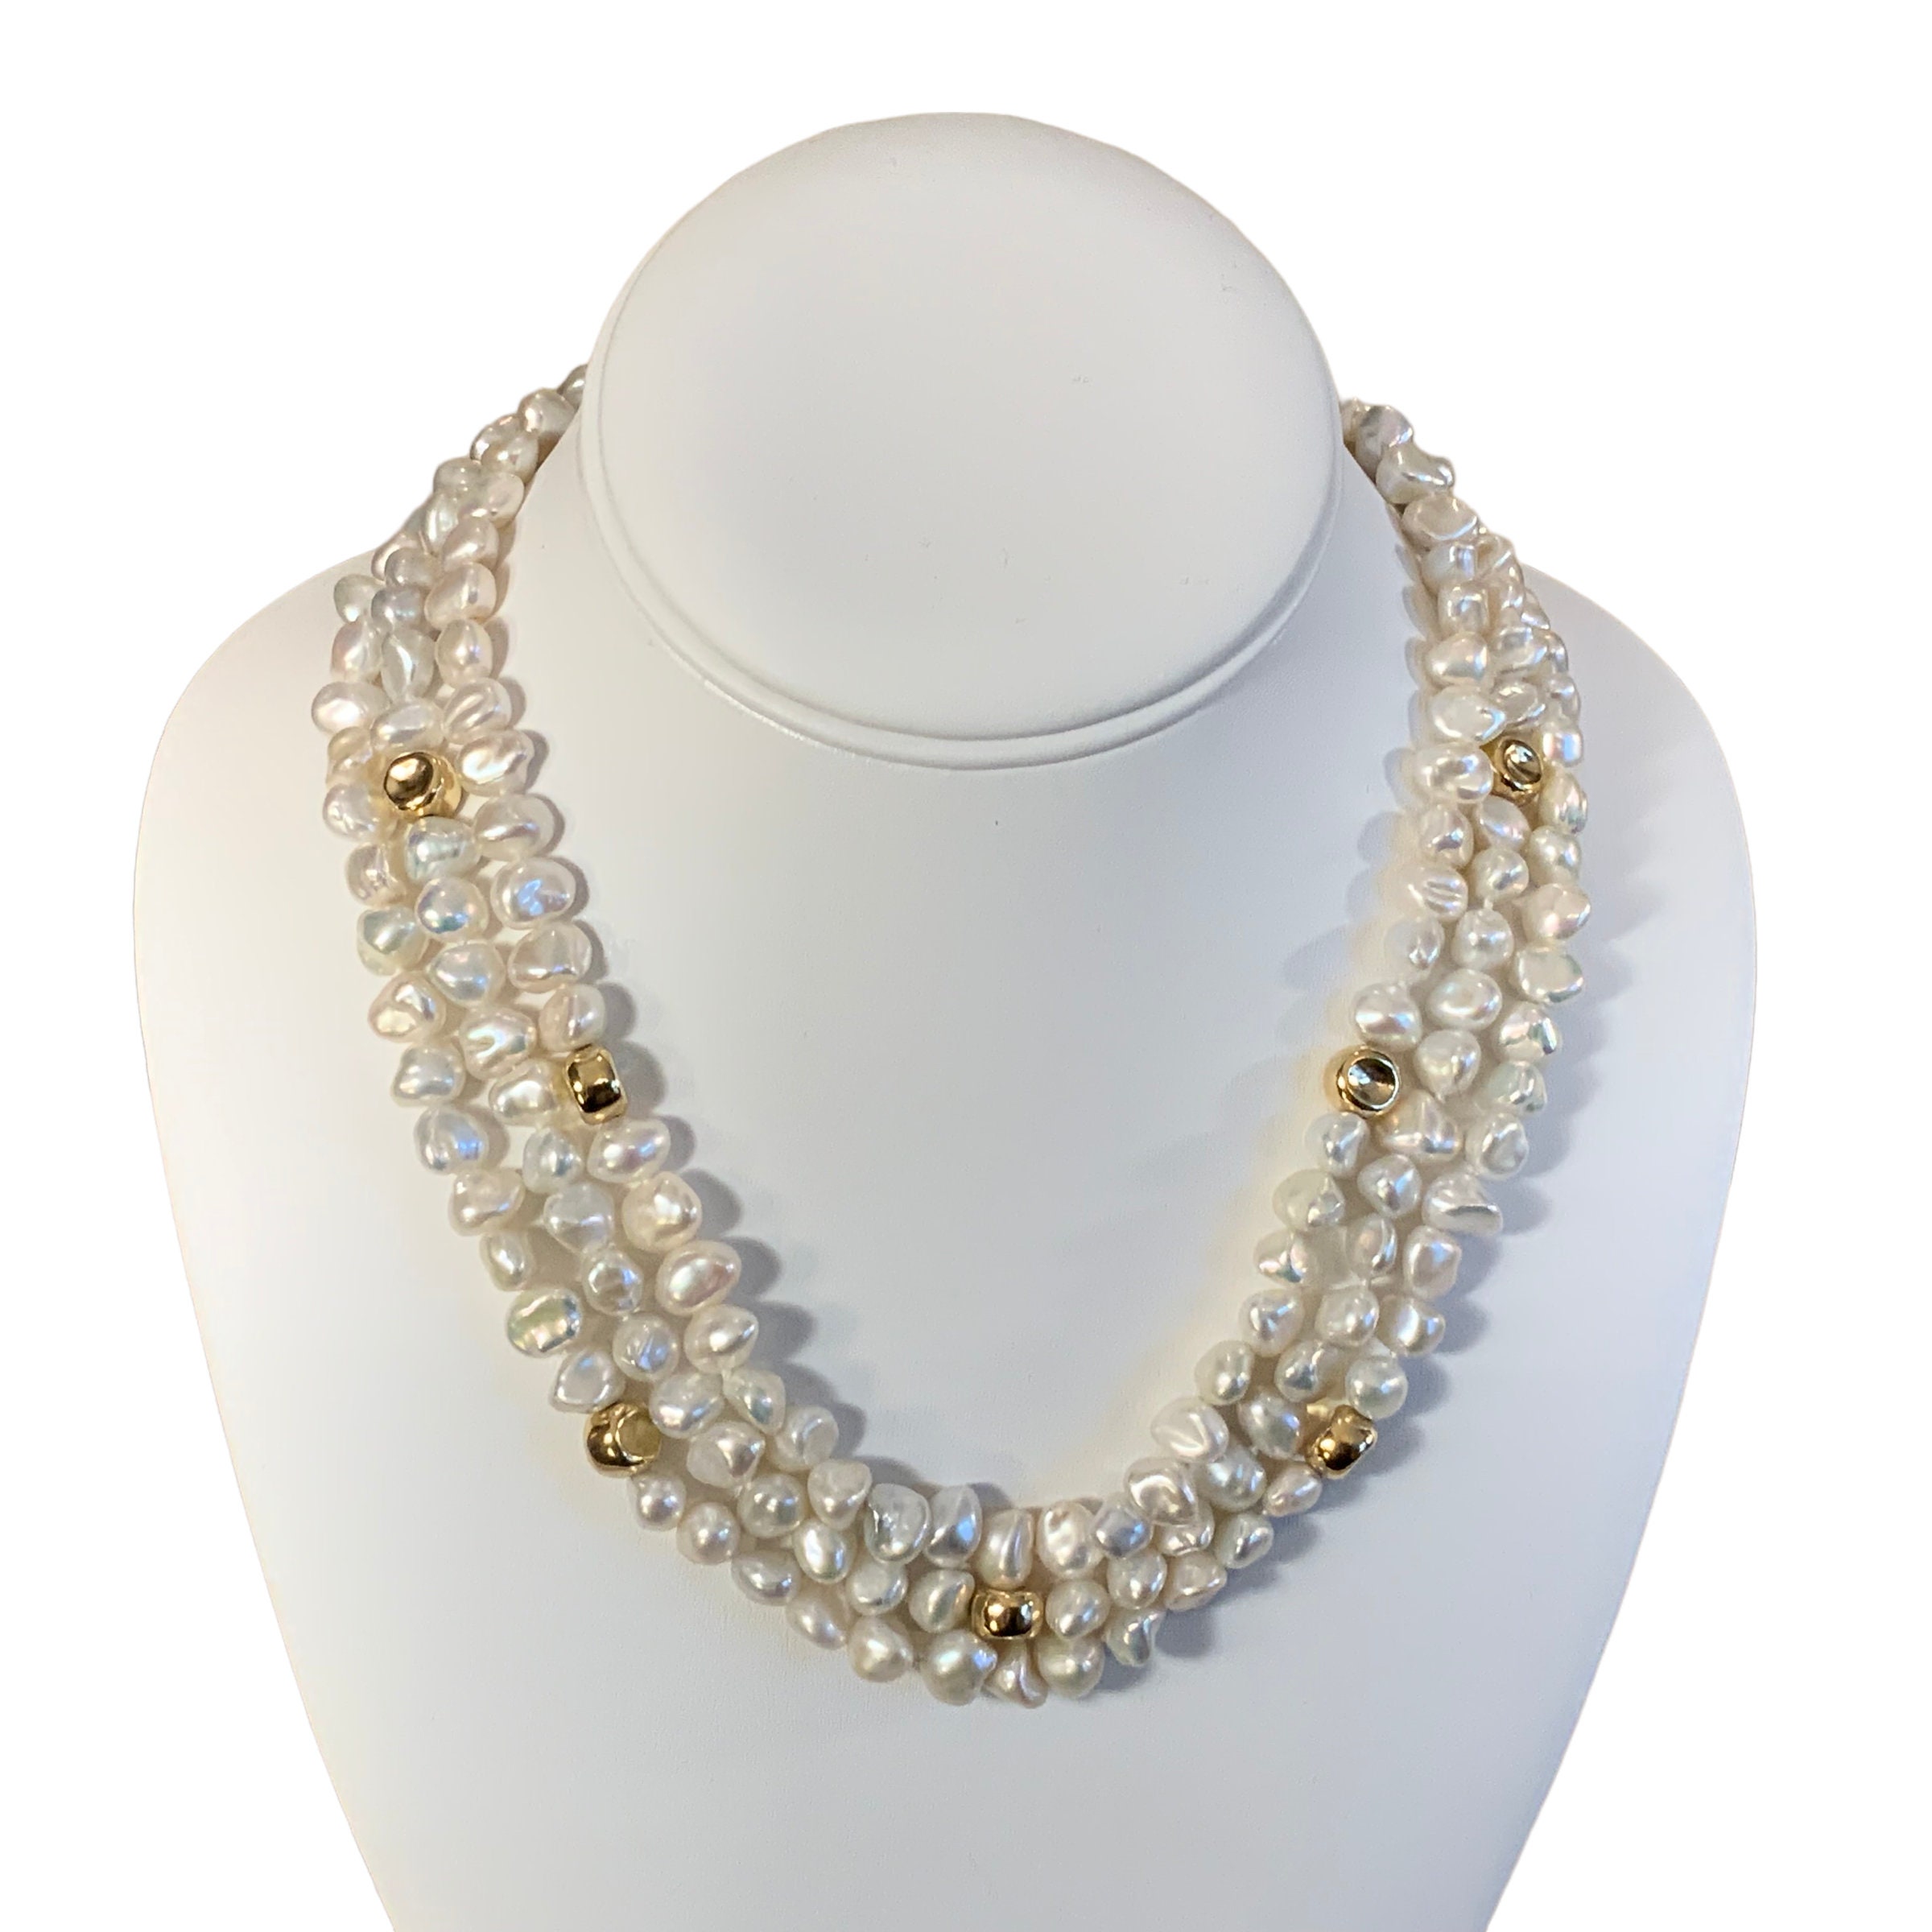 Multistrand Cultured Freshwater Pearl Vermeil Accent Necklace - Etsy